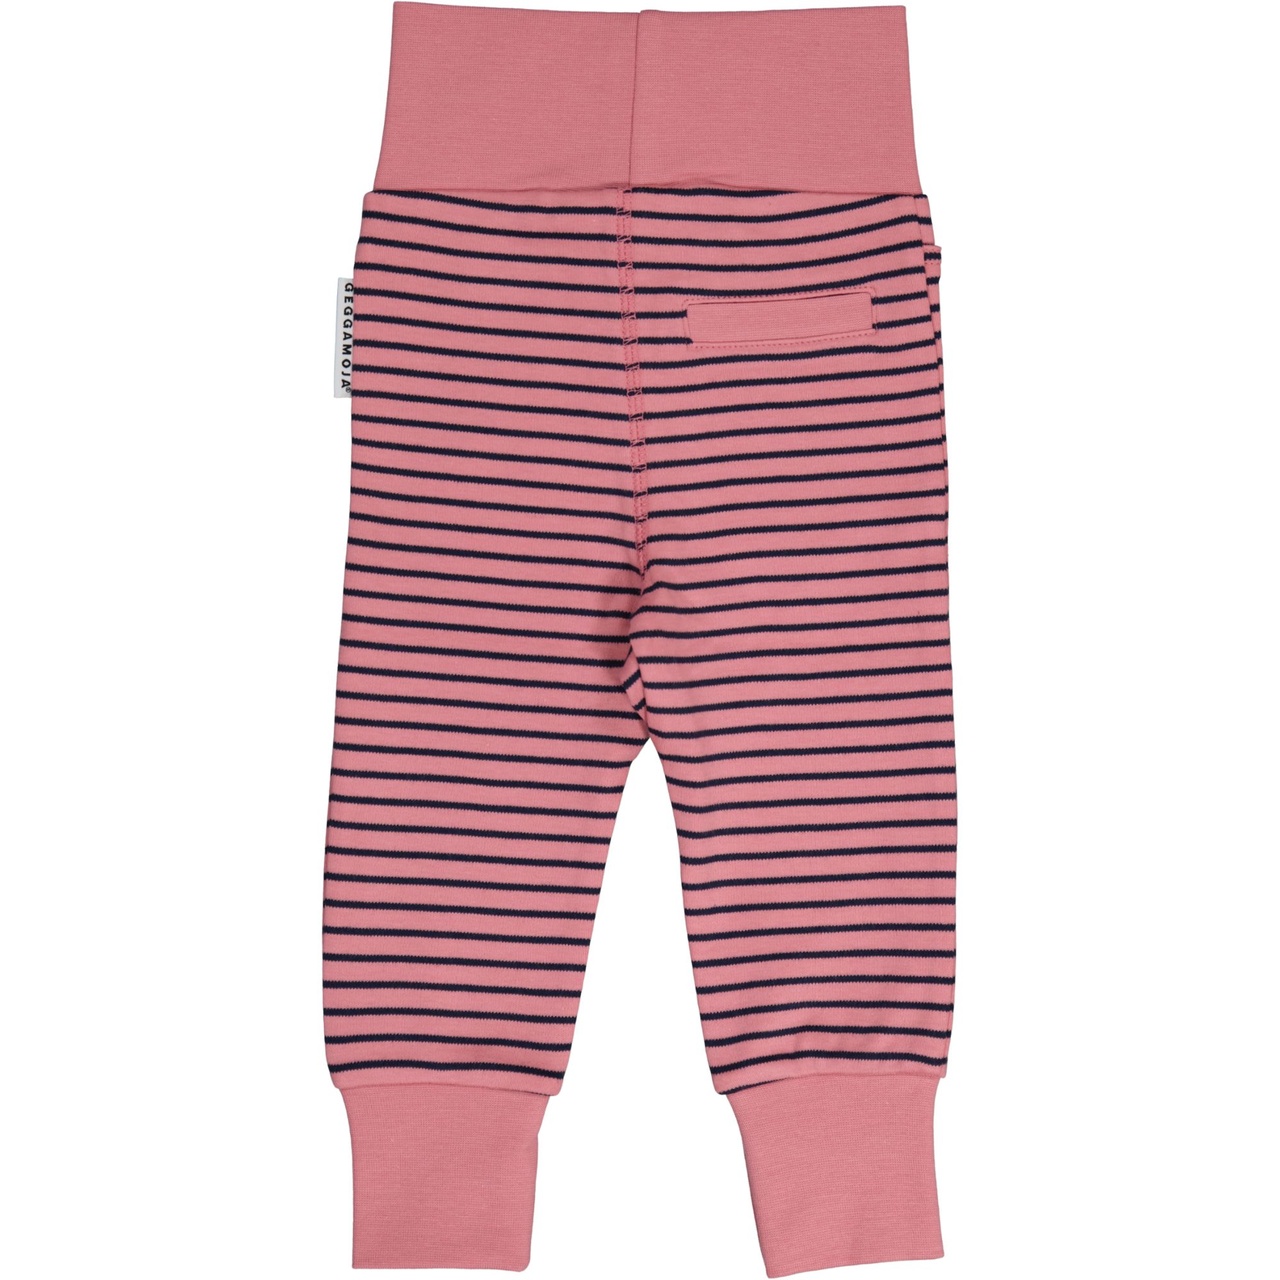 Baby trouser Pink/navy 86/92